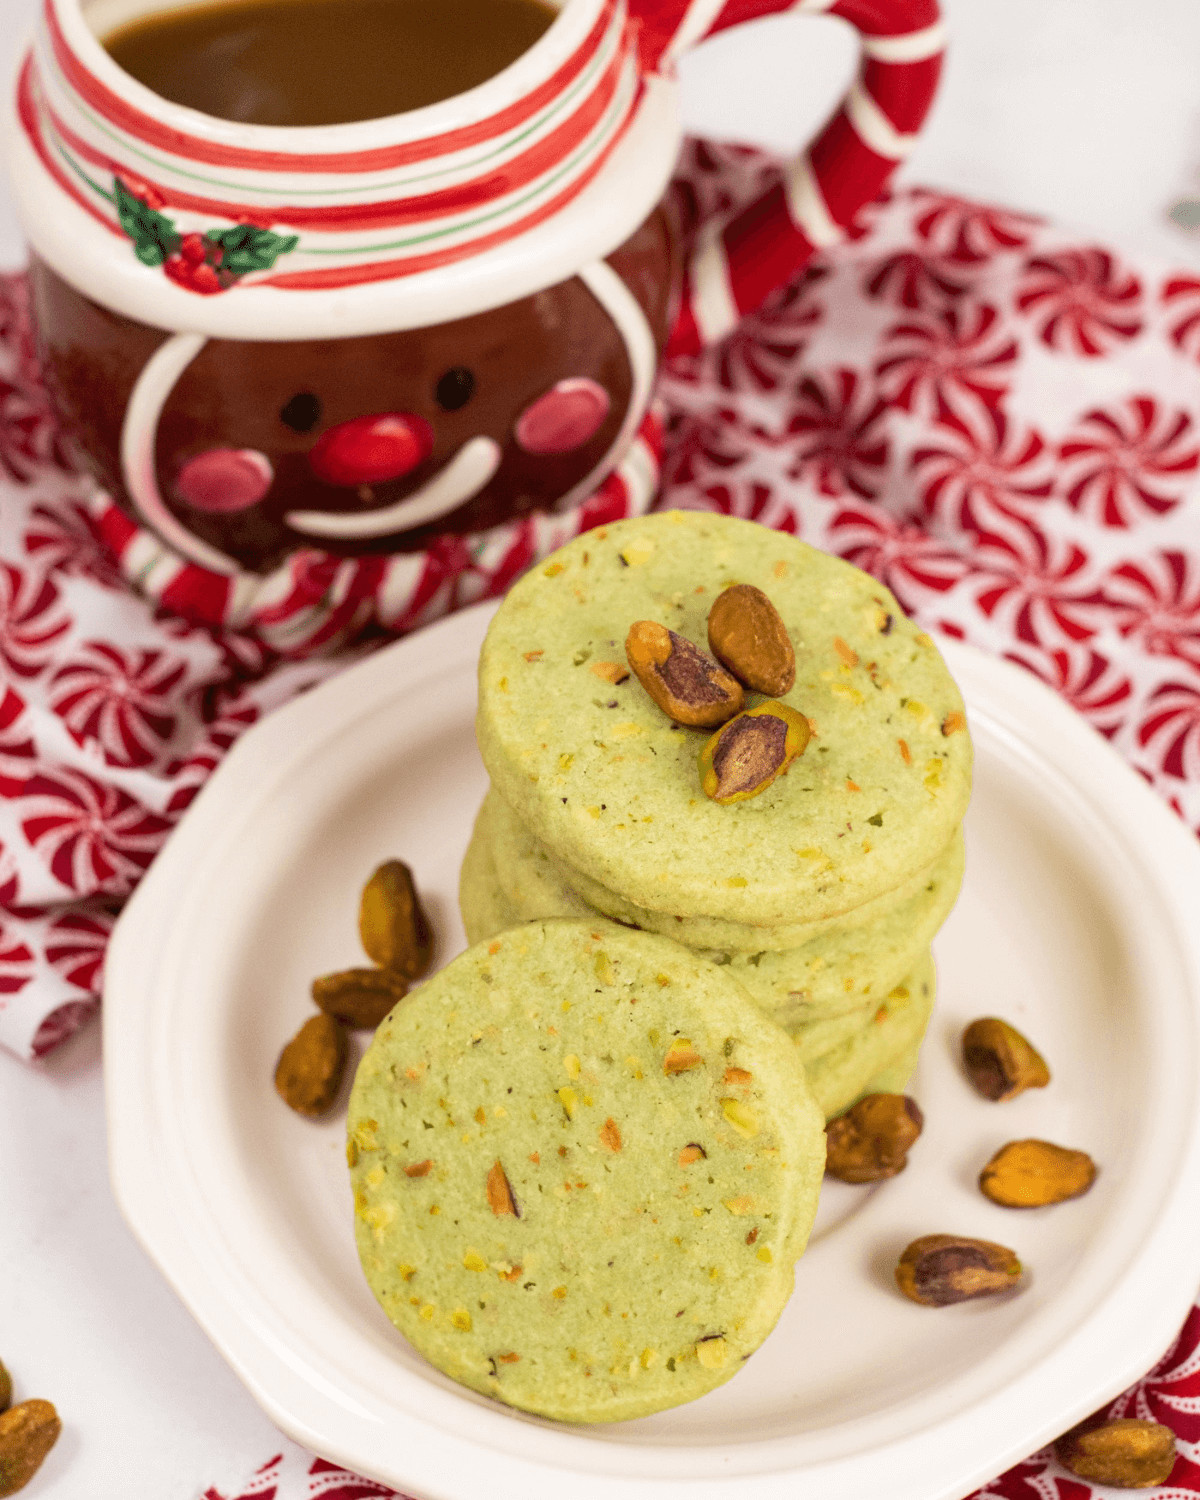 A view of the pistachio cookies and a cup of coffee.